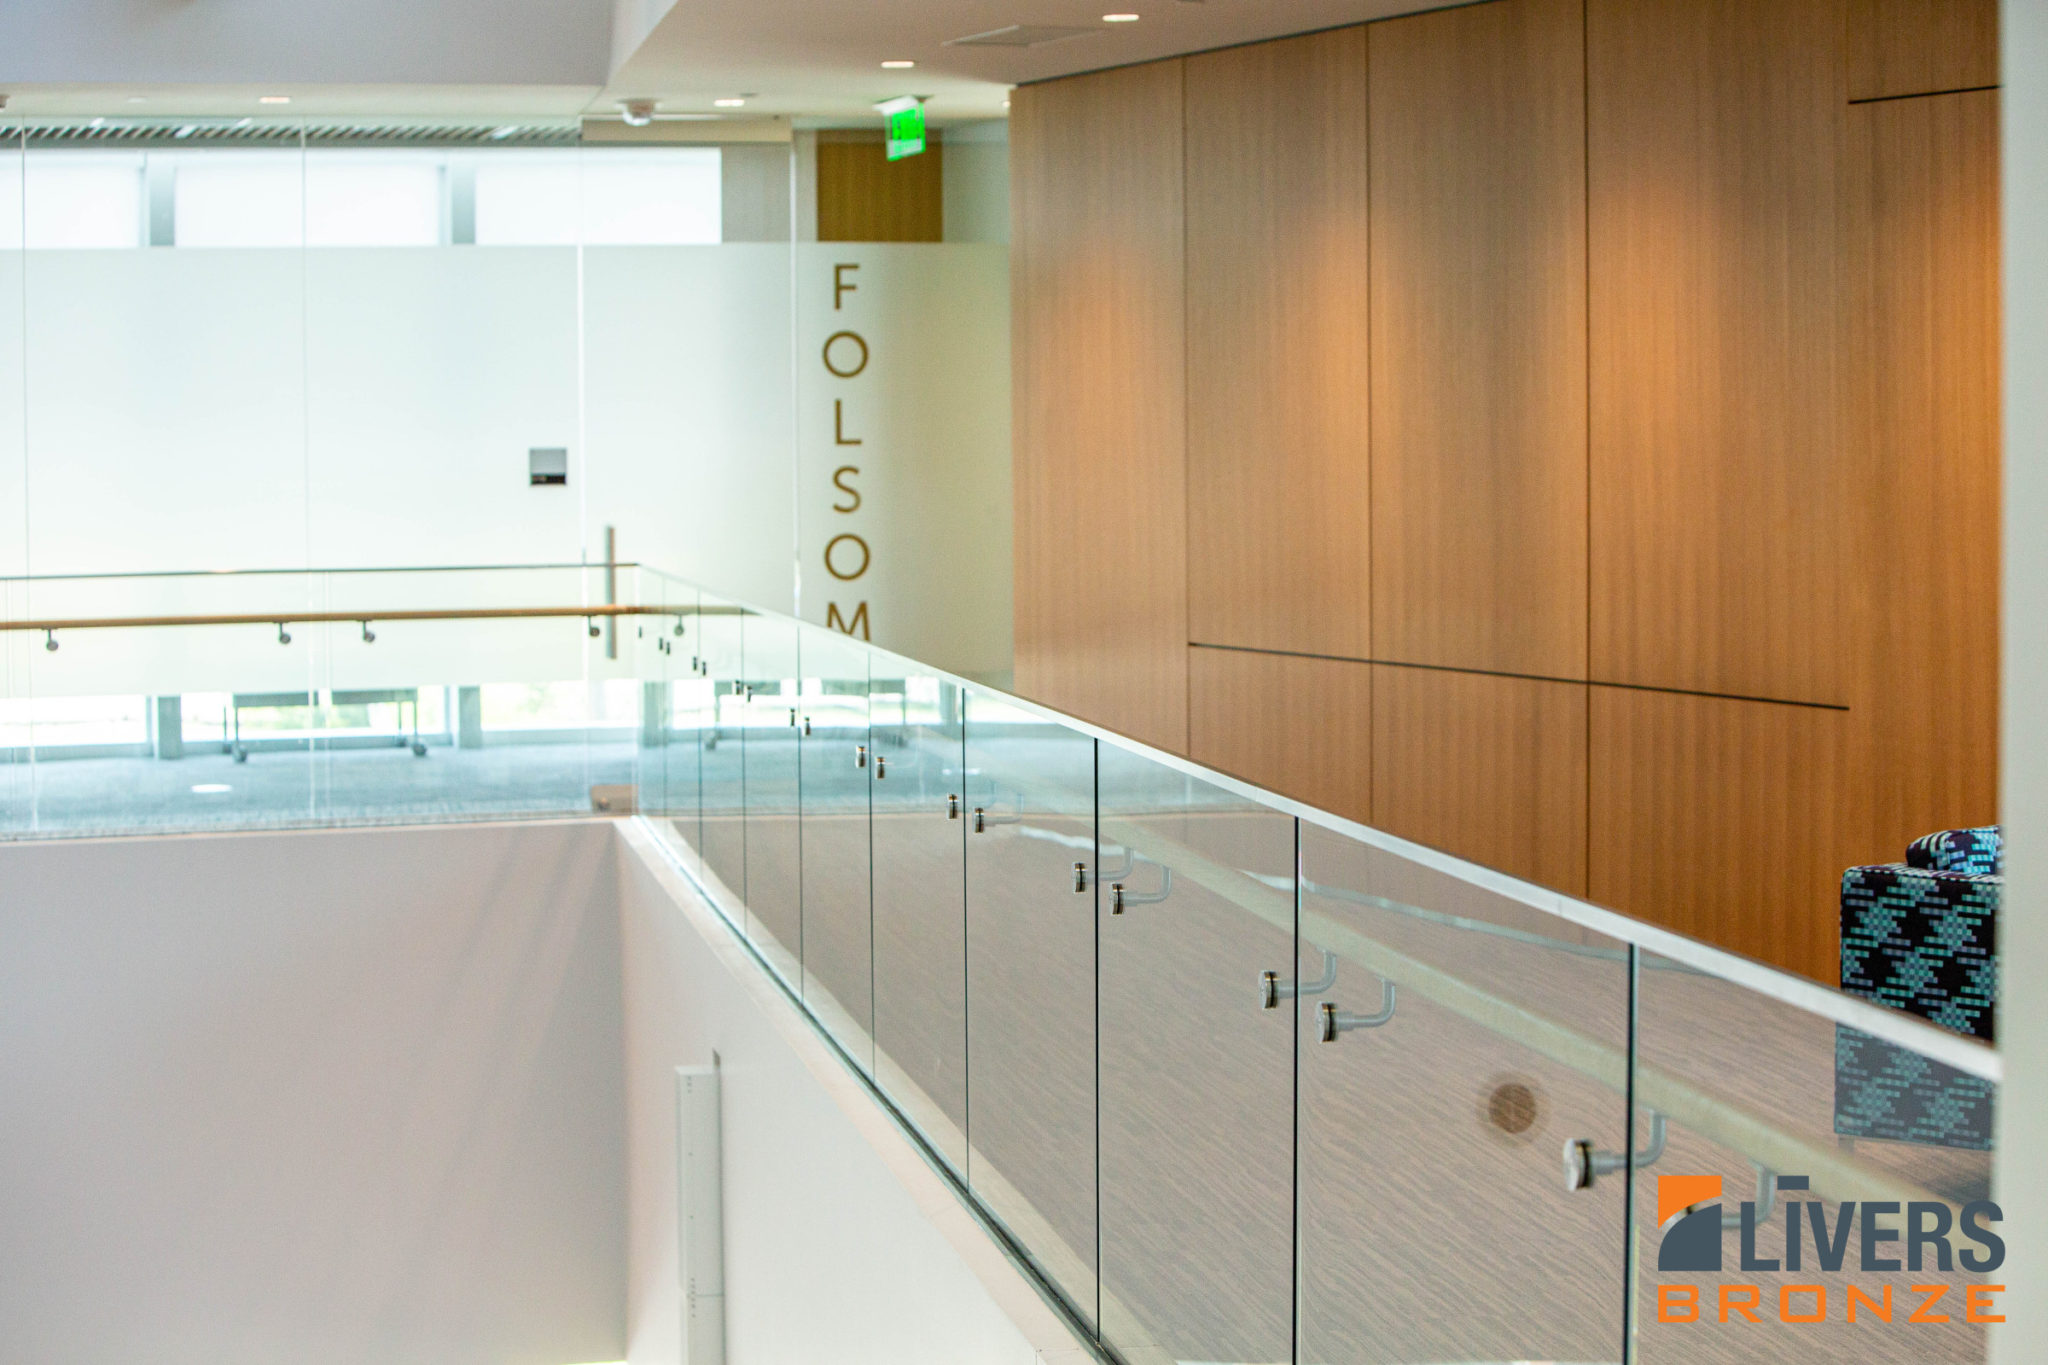 Livers Bronze Struct-U-Rail Commercial Glass Railing was installed at the University of Texas Center for Brain Health in Dallas and was Made in the USA